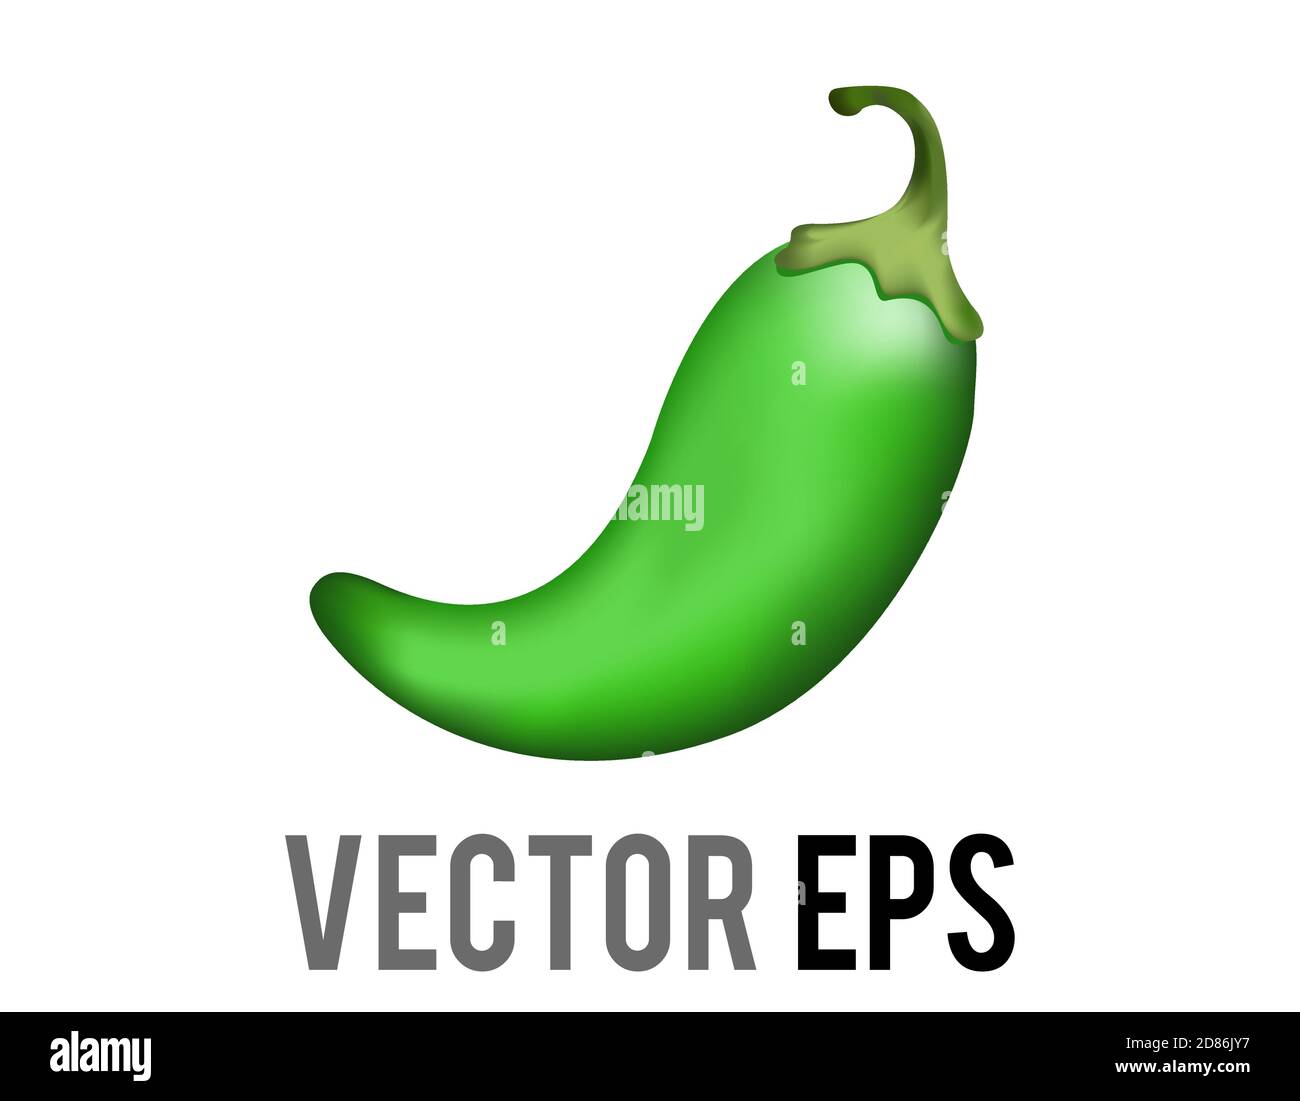 The isolated vector green curled Mexican chili pepper icon with green stem, representing some foot hot and spicy Stock Vector